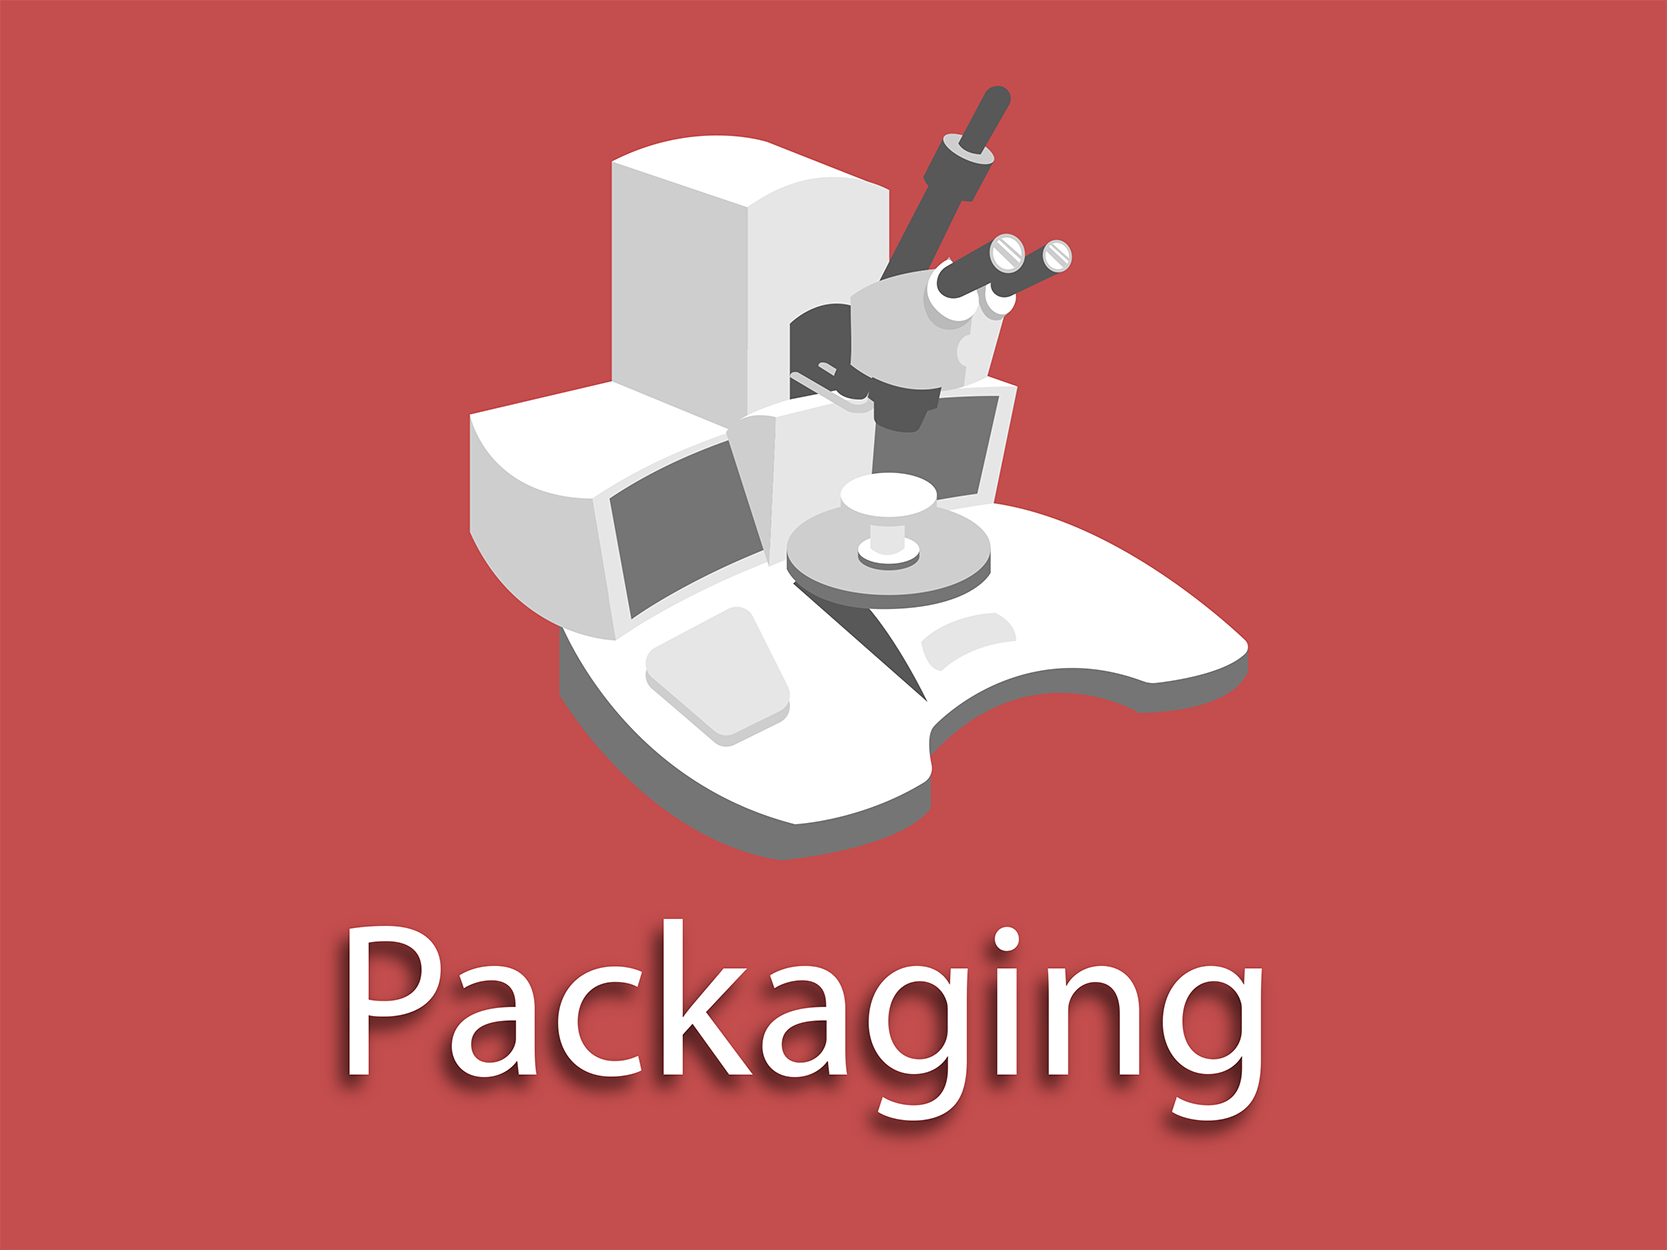 Click here to see the full list of packaging tools